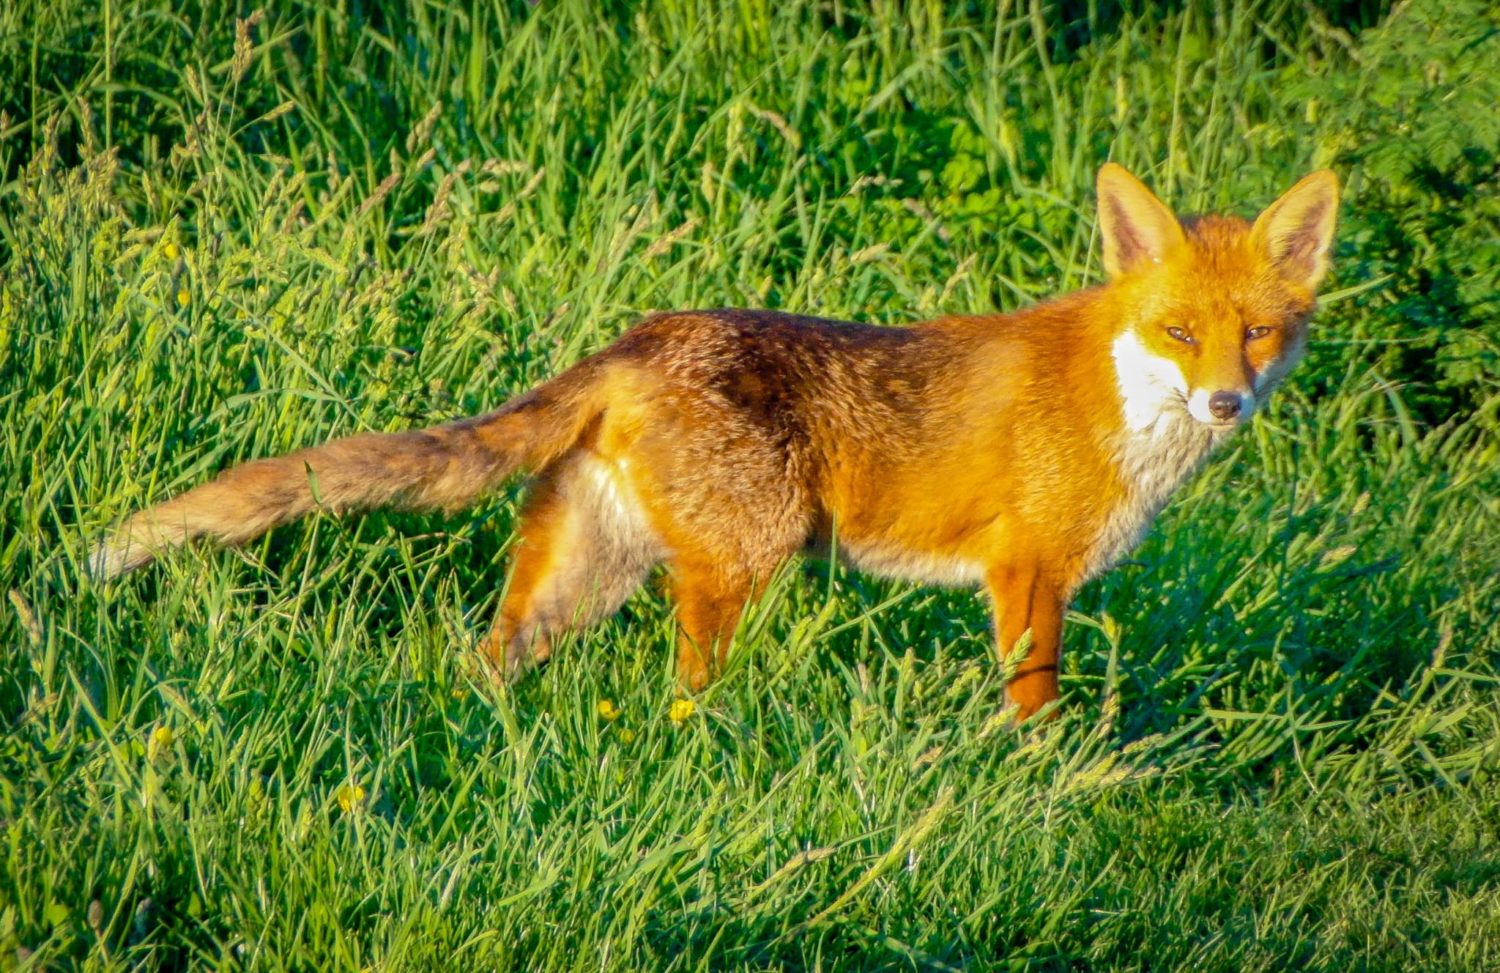 Wild red fox in grass looking at camera